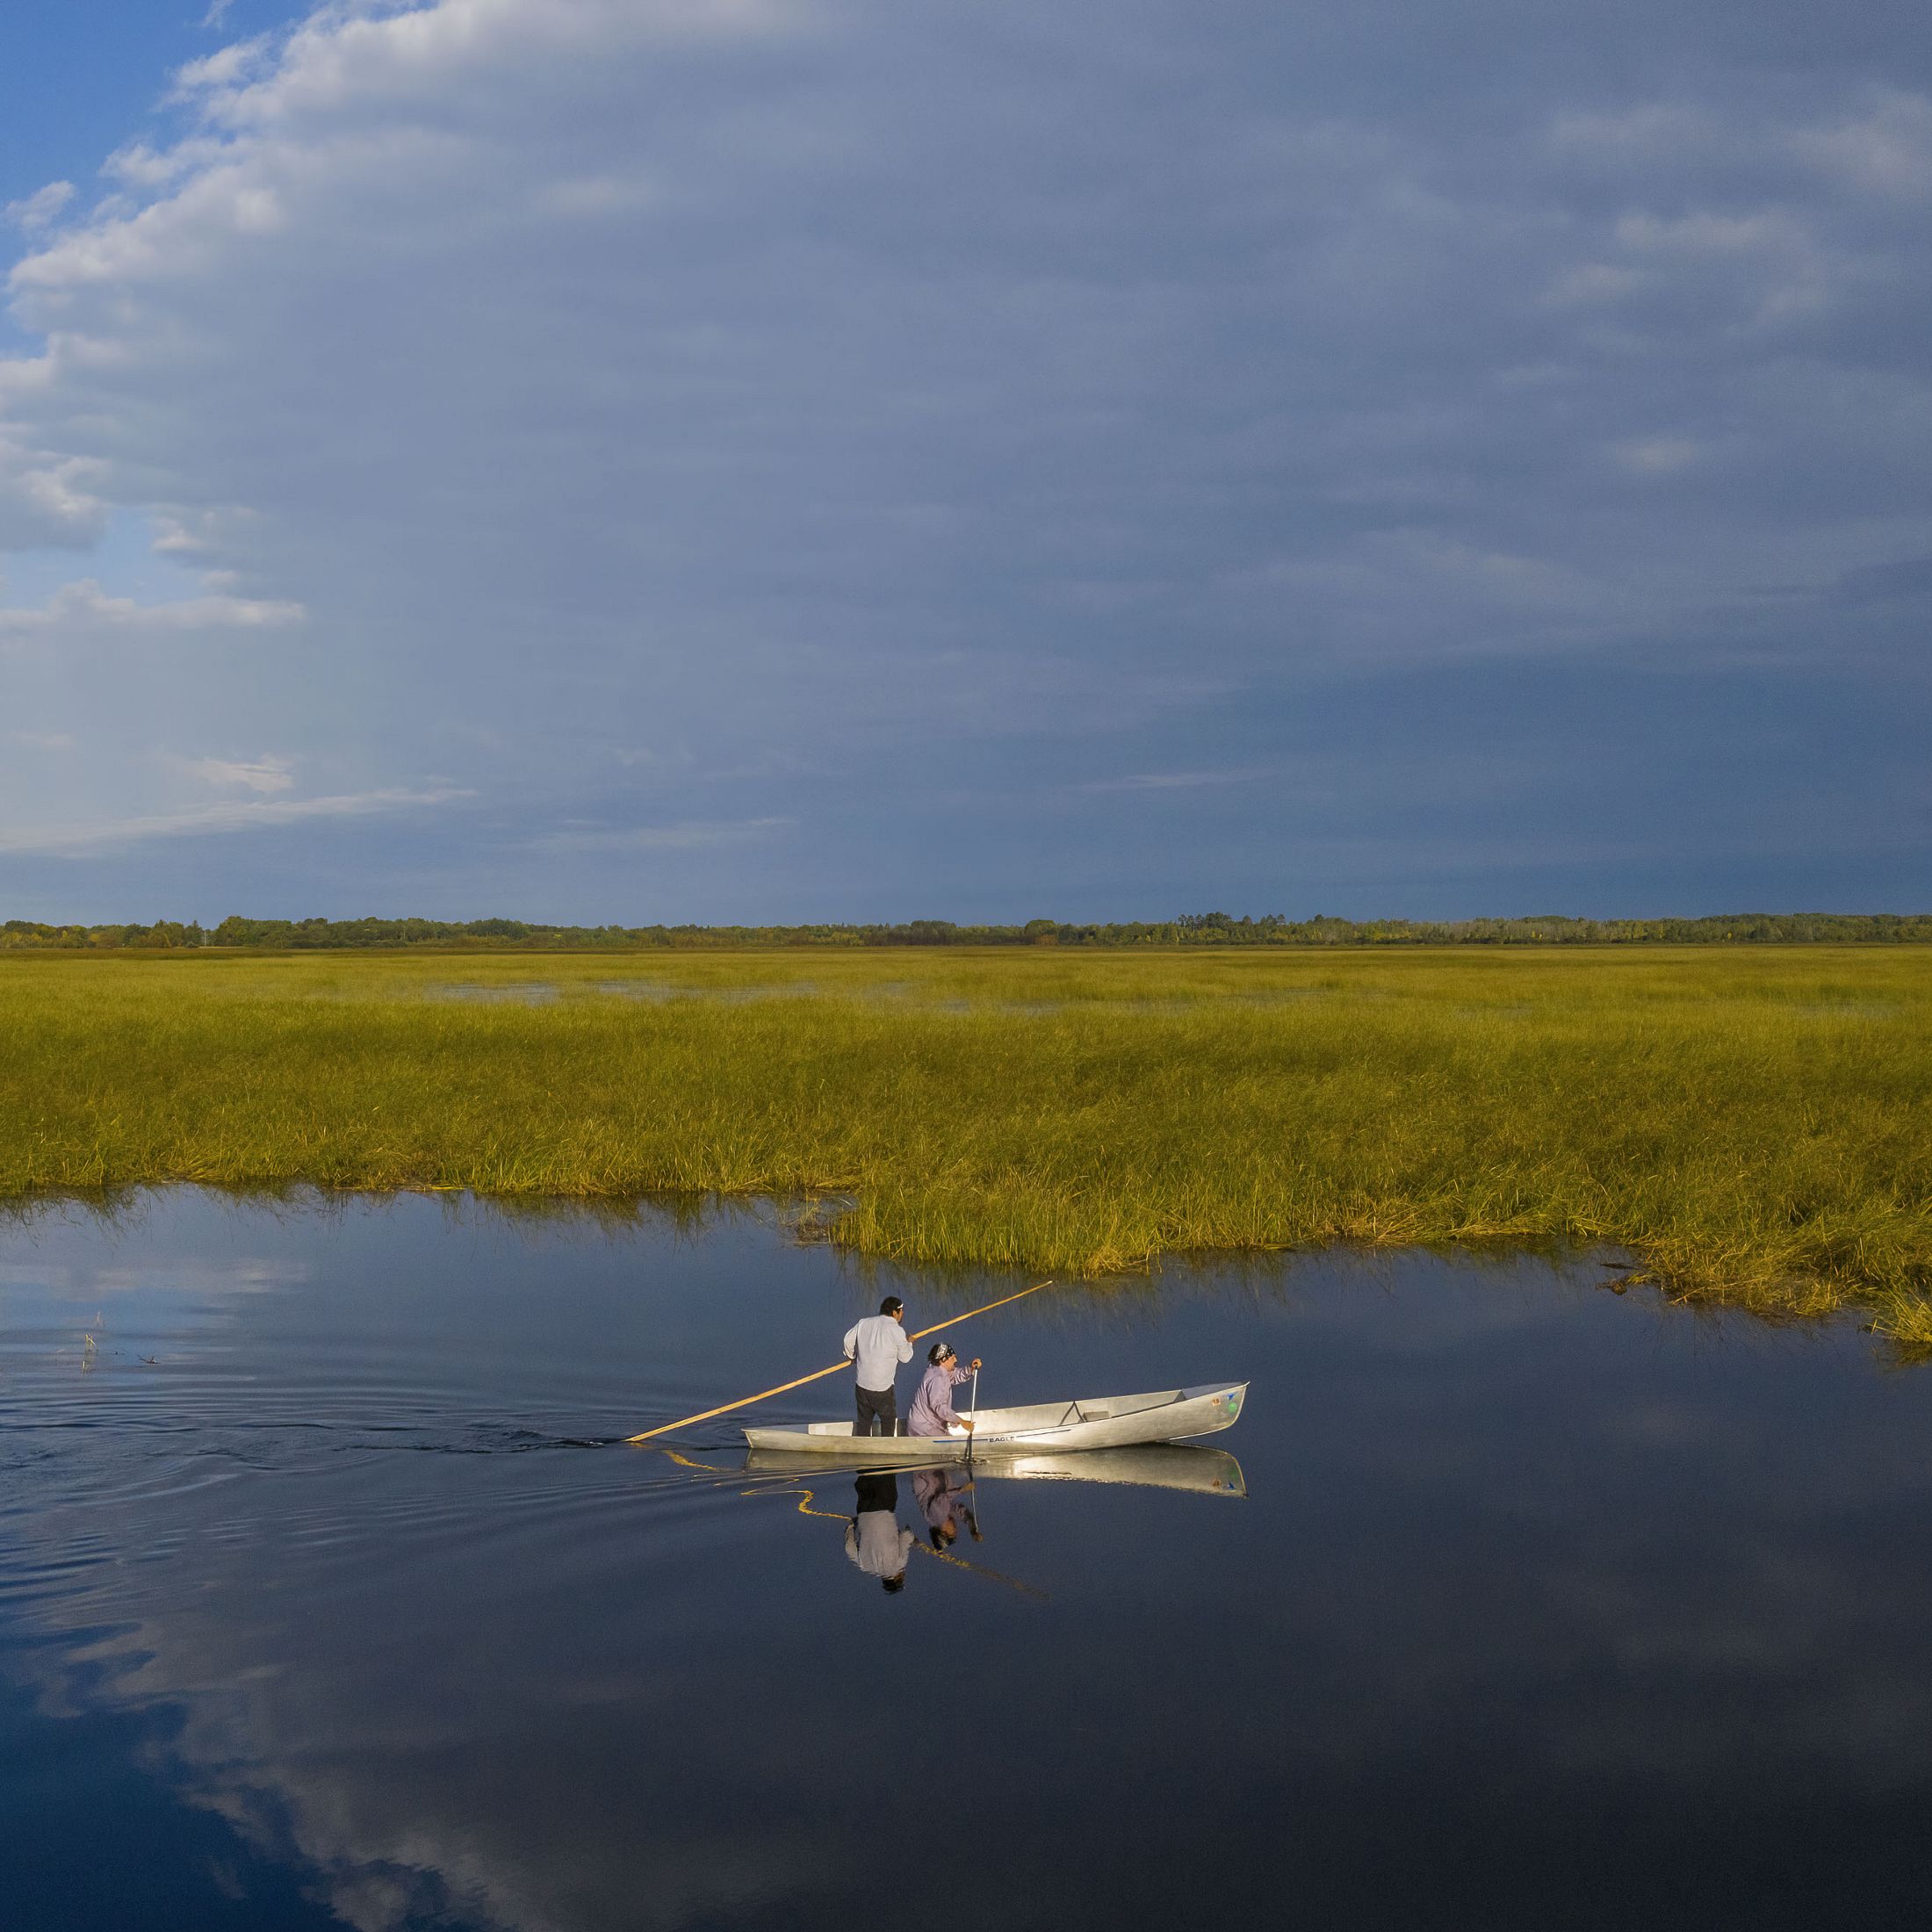 Two people in a canoe on a lake with tall, wild rice growing.